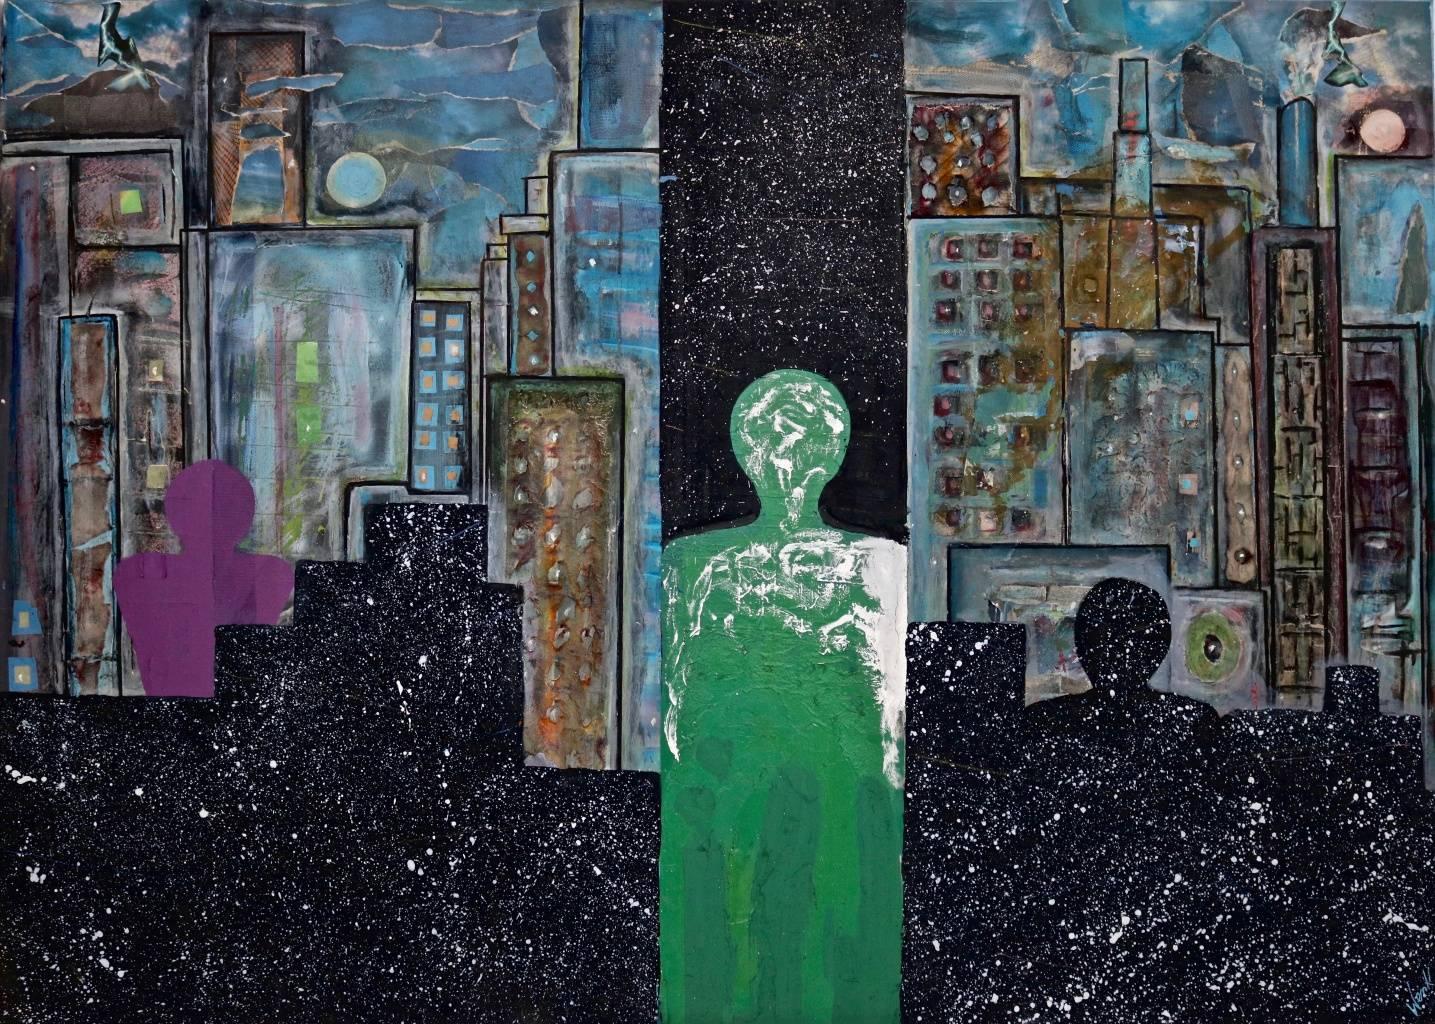 Translated title: "Paulist nocturne"

Mixed media on canvas. 